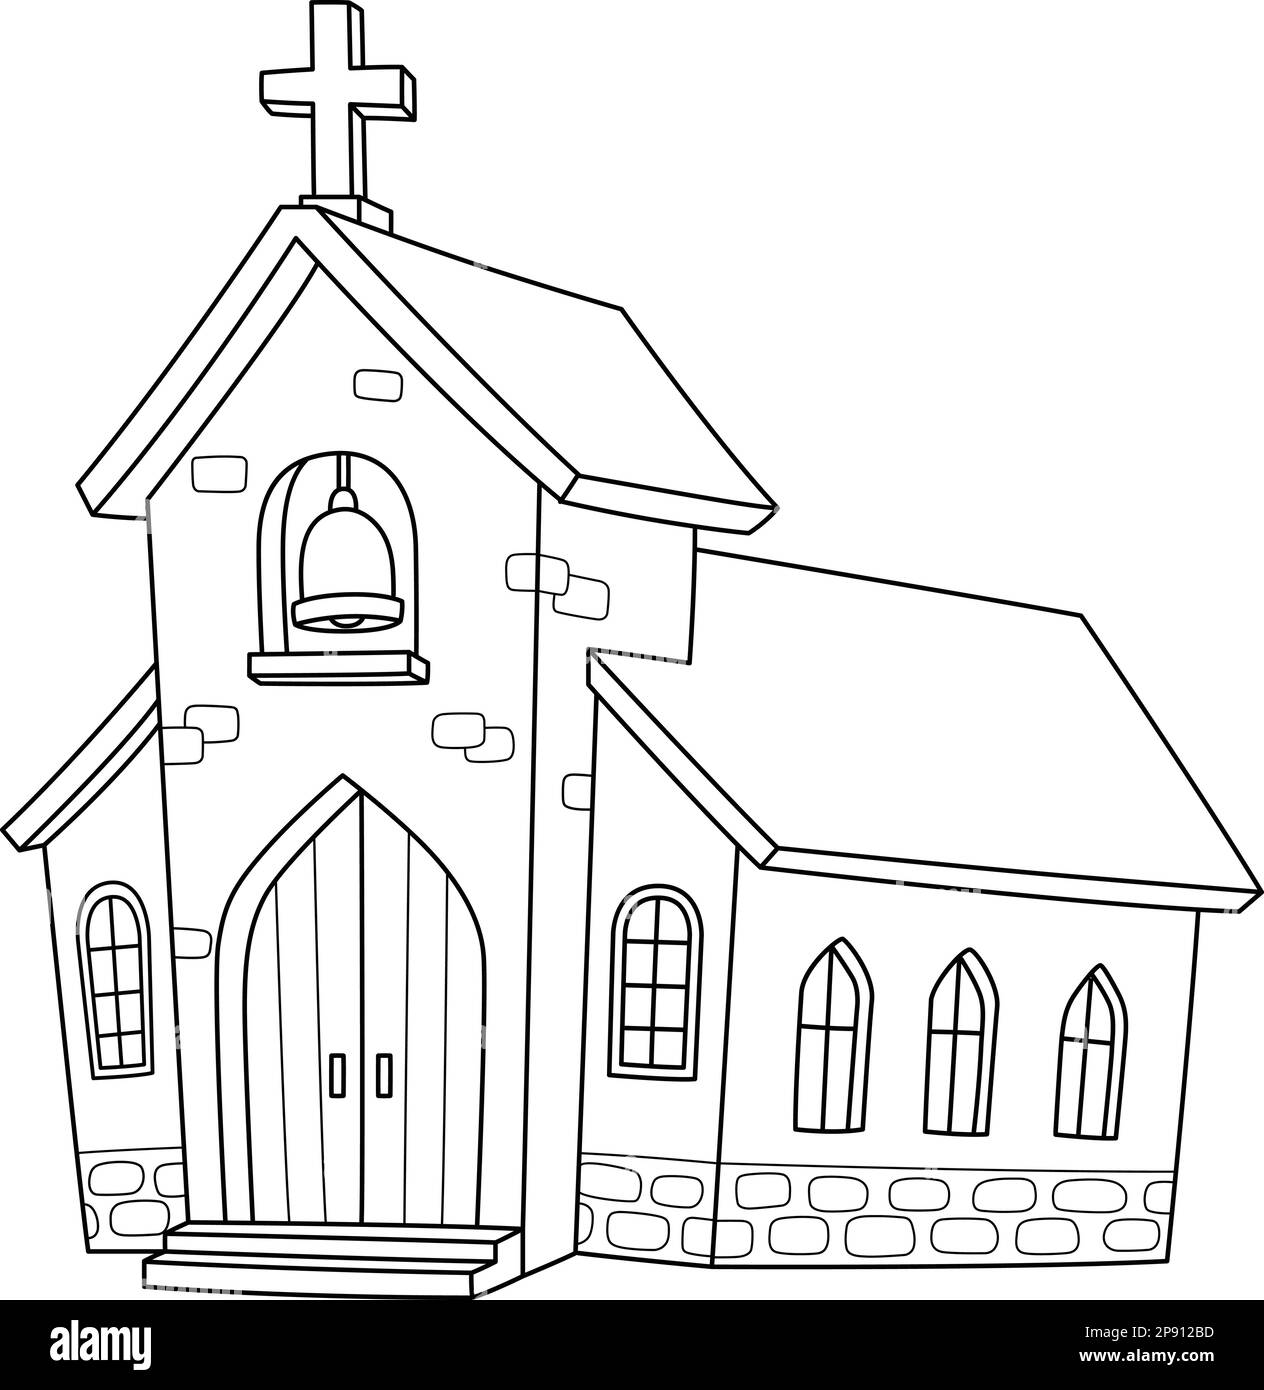 Christian Church Isolated Coloring Page for Kids Stock Vector Image ...